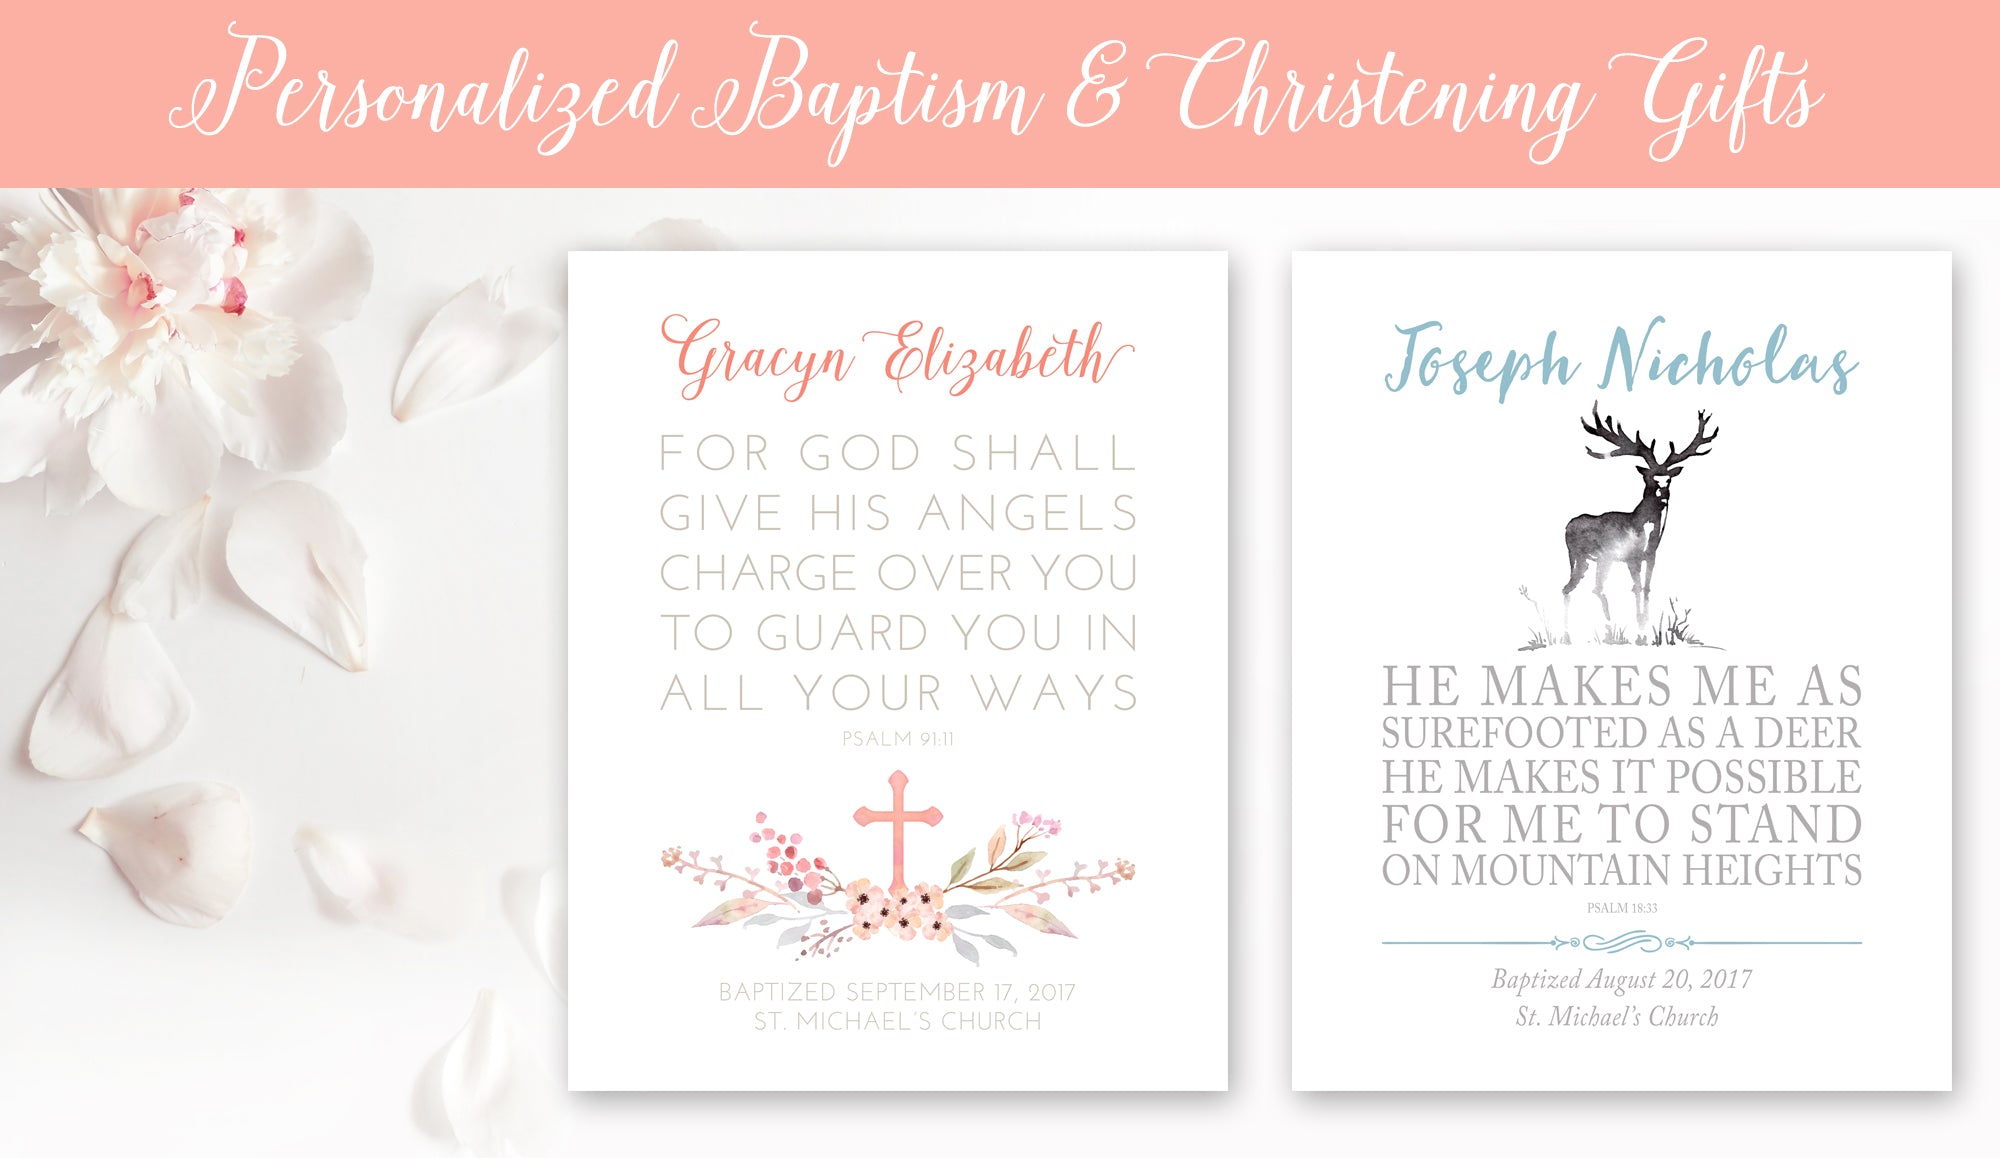 Personalized Baptism & Christening Gifts personalized prints for a girl or boy